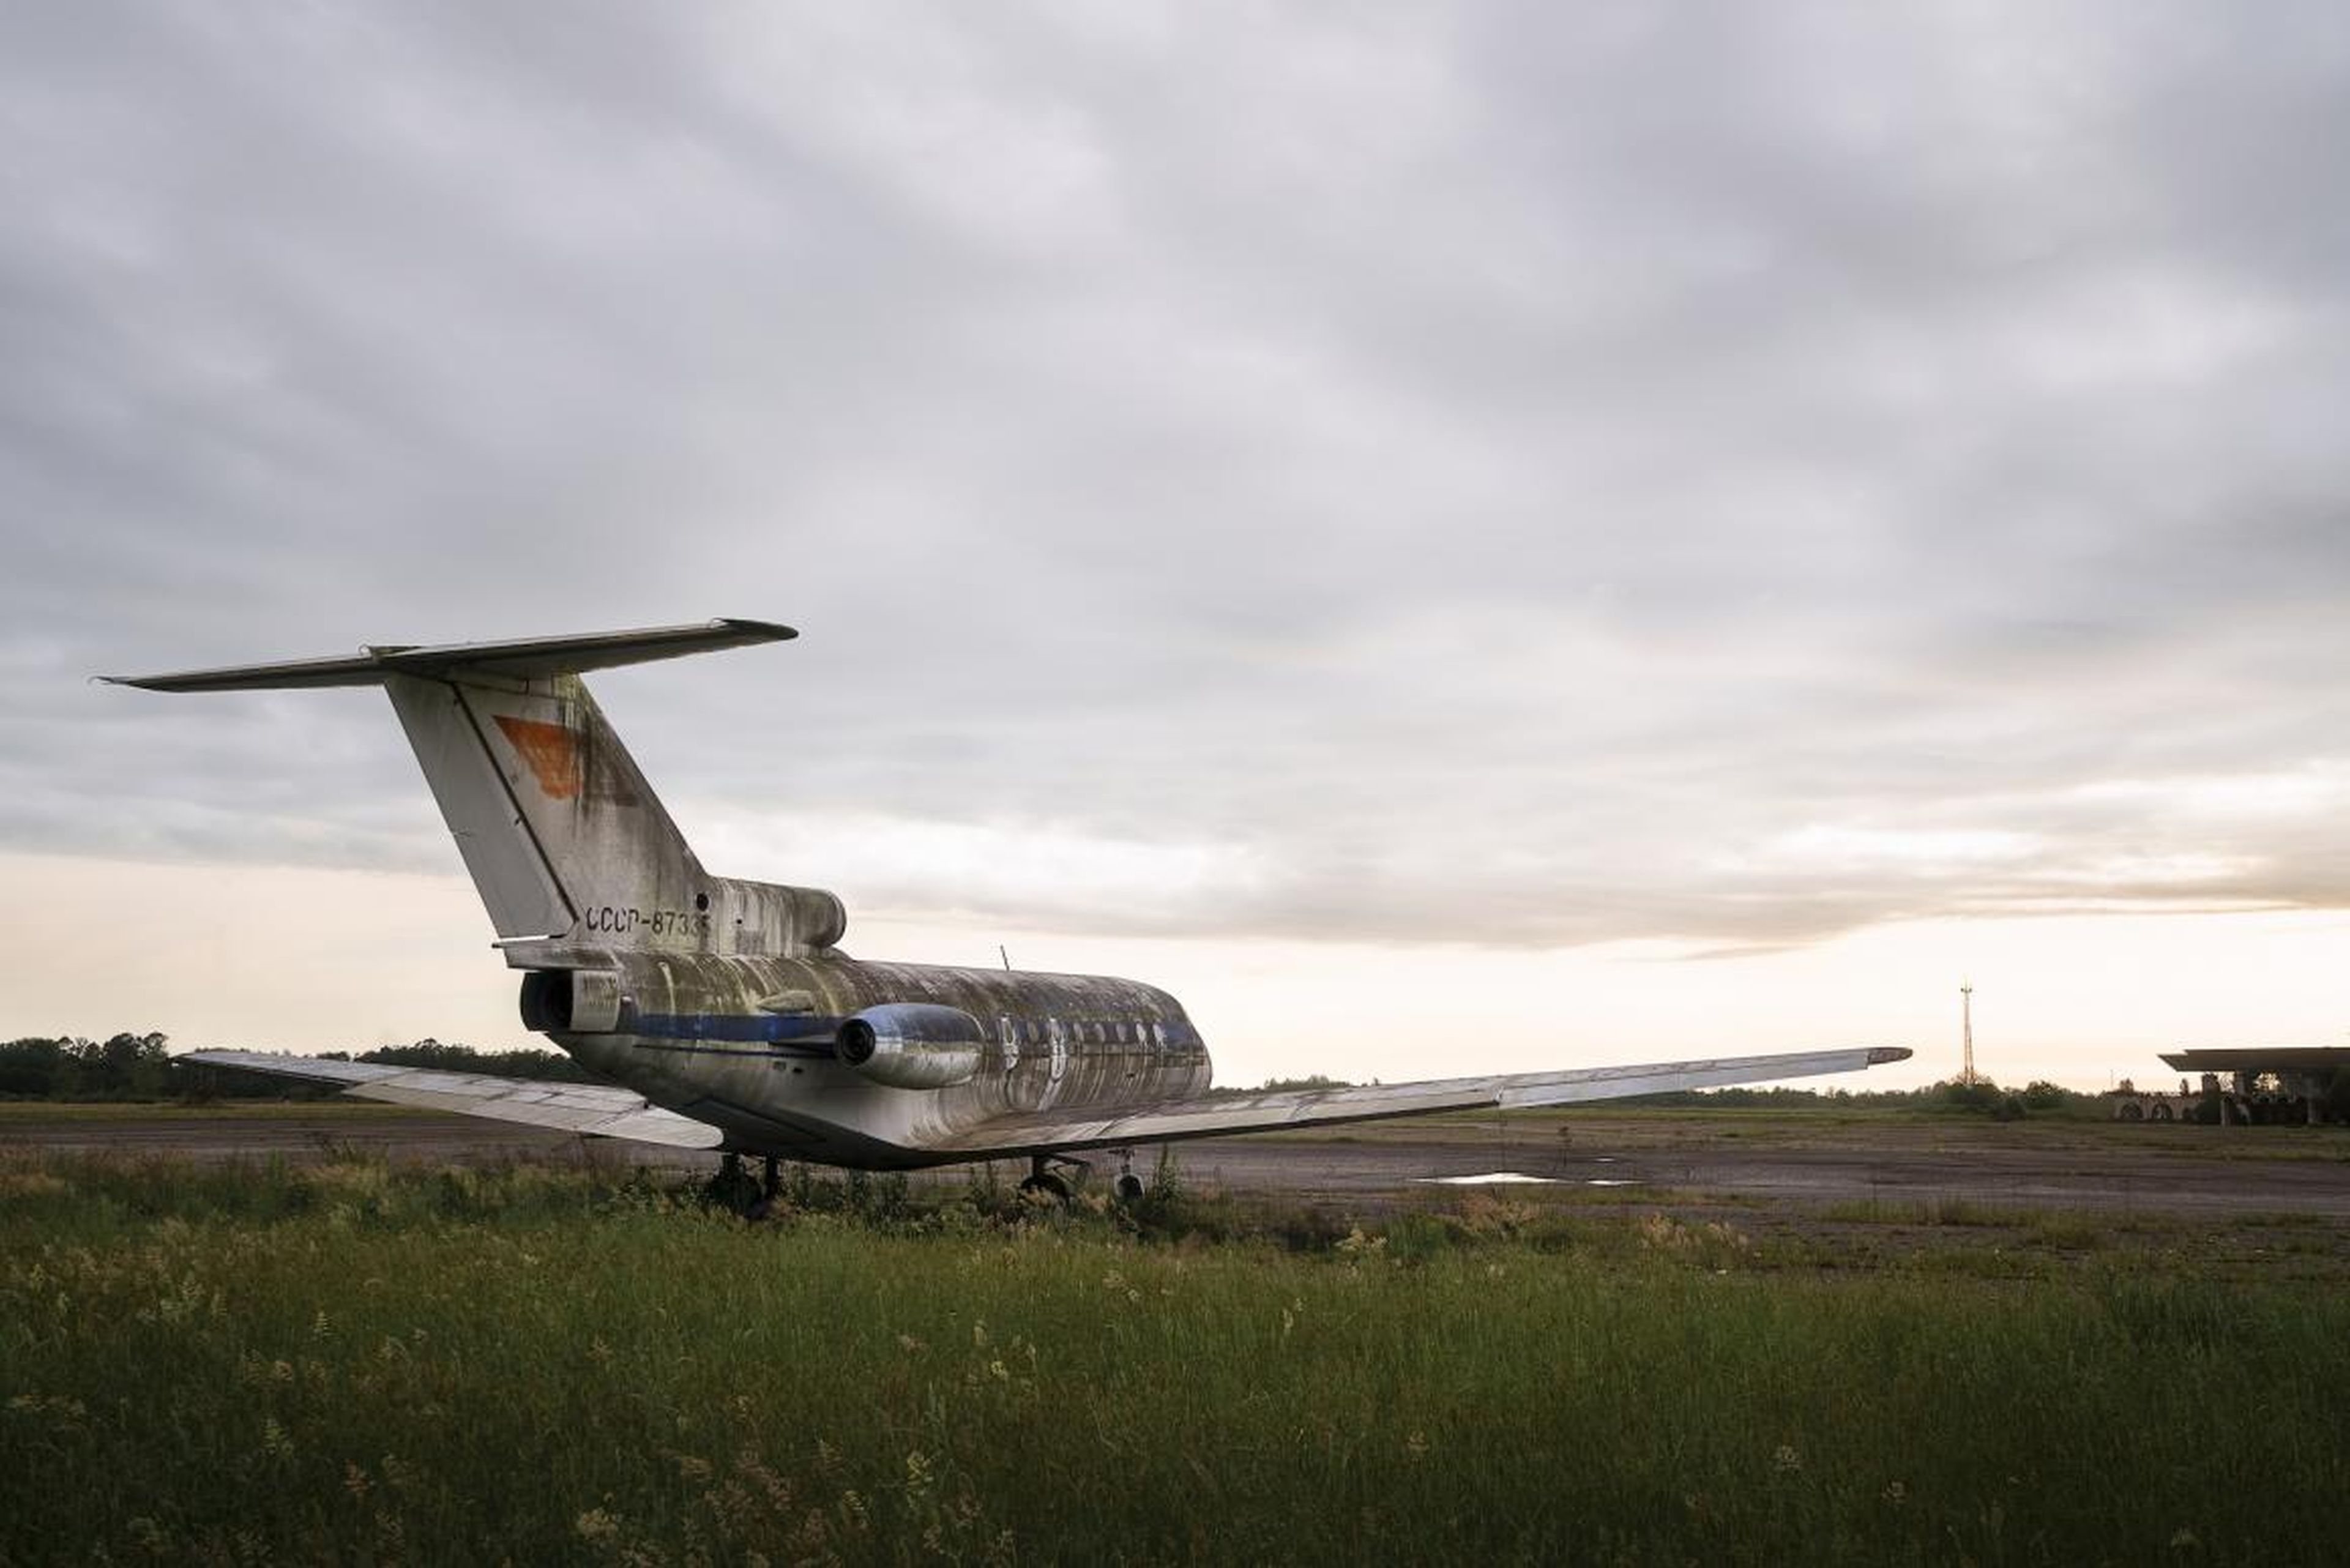 There's a non-functioning plane still sitting in the abandoned runway. The Yak-40 aircraft carried former Georgian president Eduard Shevardnadze to Abkhazia in March 1993 to take charge of Georgian forces in the region.